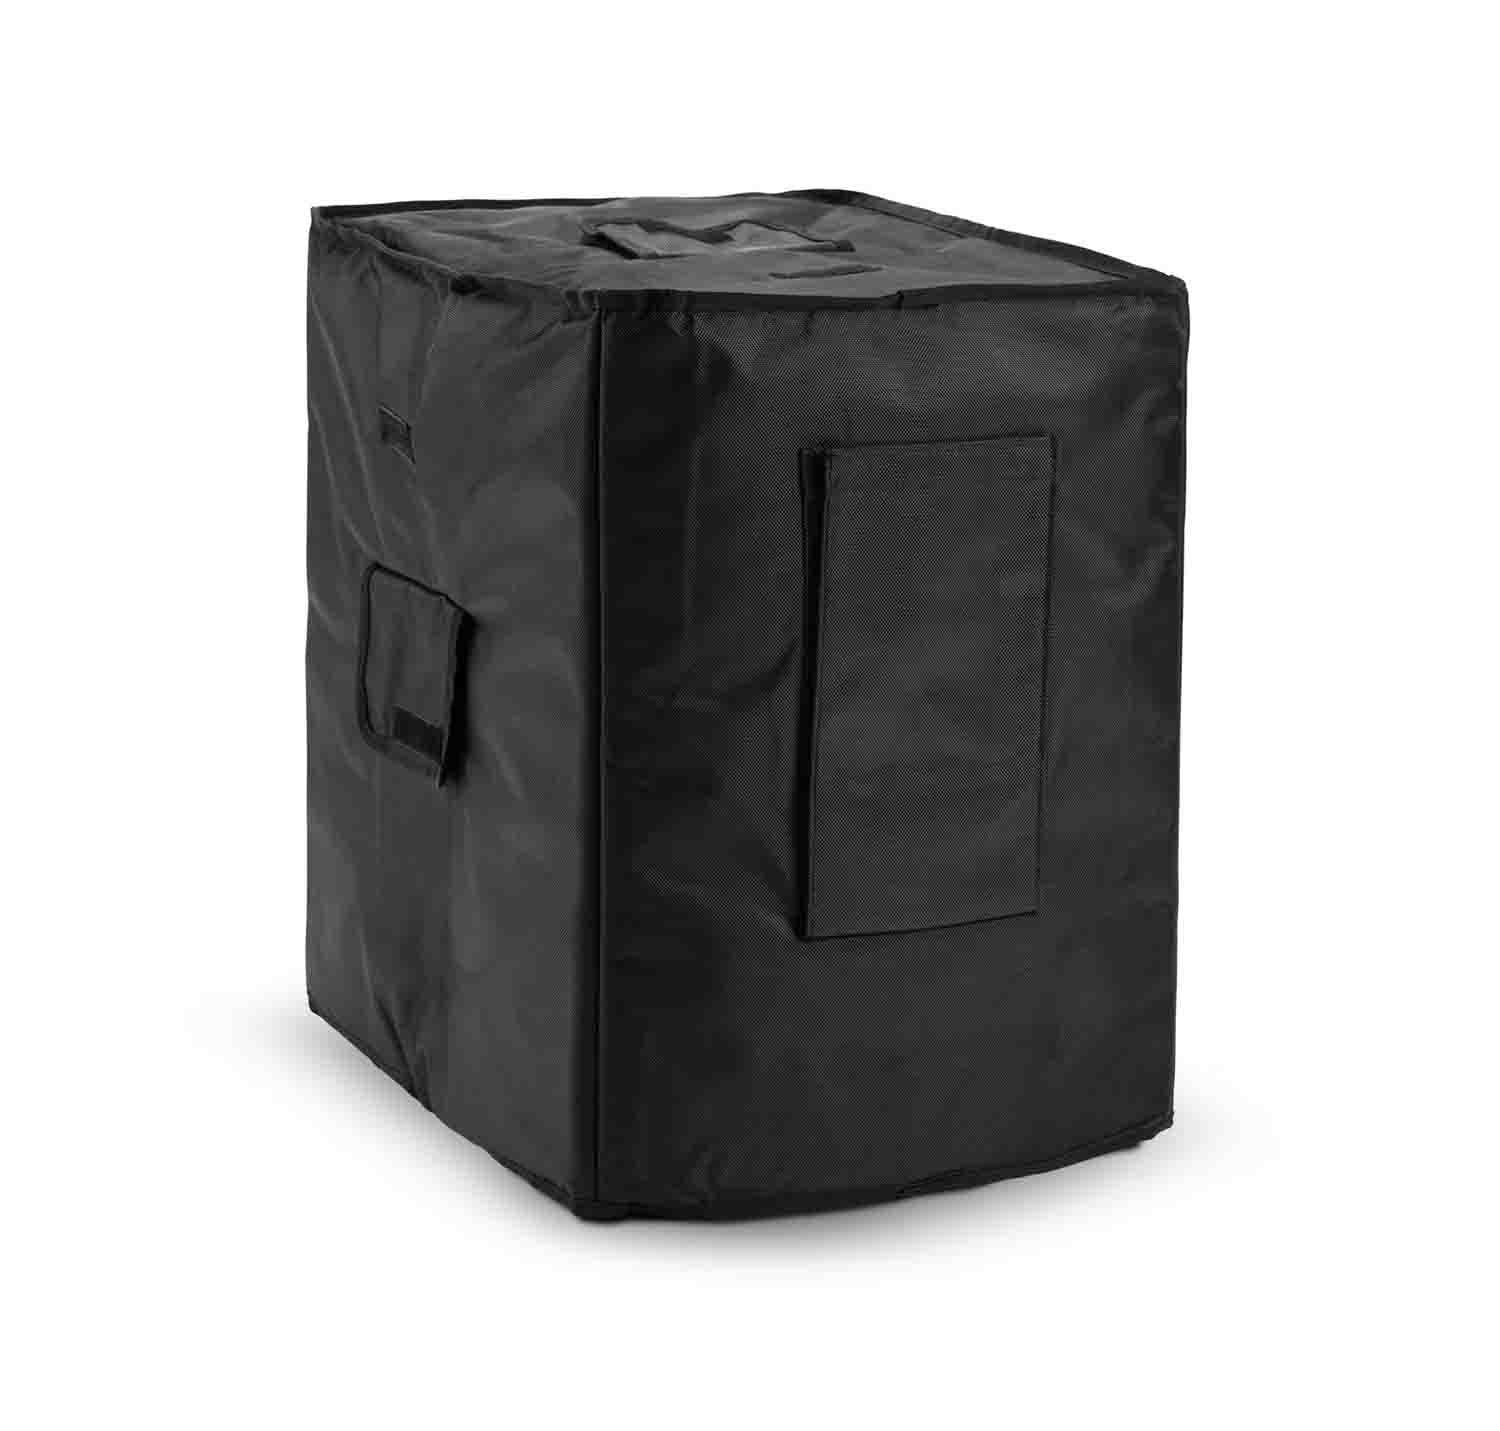 LD System MAUI 28 G3 SUB PC, Padded Protective Cover for MAUI 28 G3 Subwoofer - Hollywood DJ